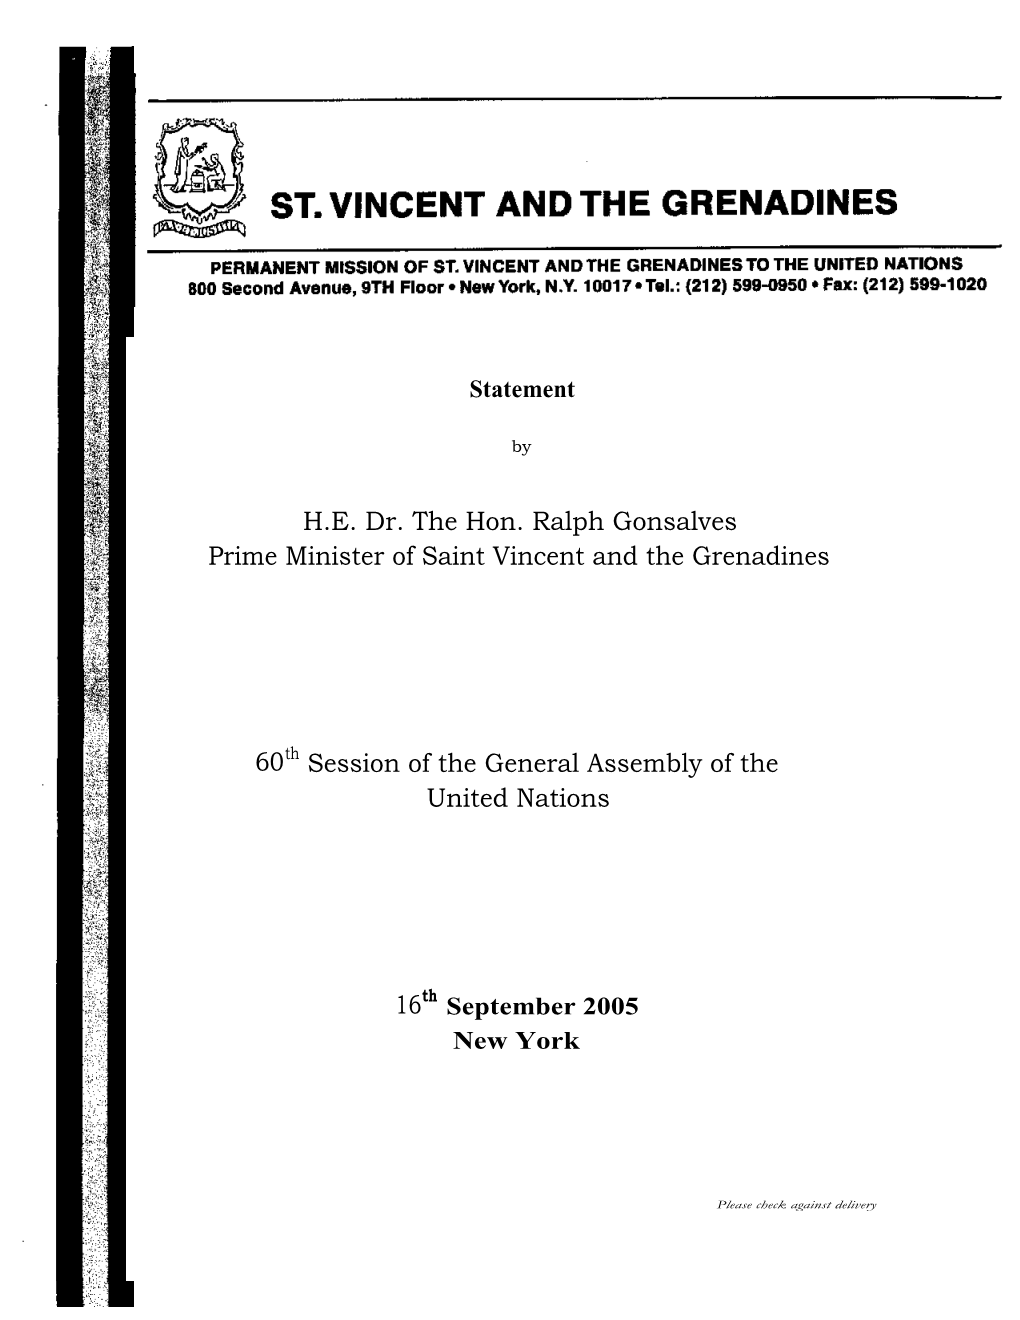 H.E. Dr. the Hon. Ralph Gonsalves Prime Minister of Saint Vincent and the Grenadines